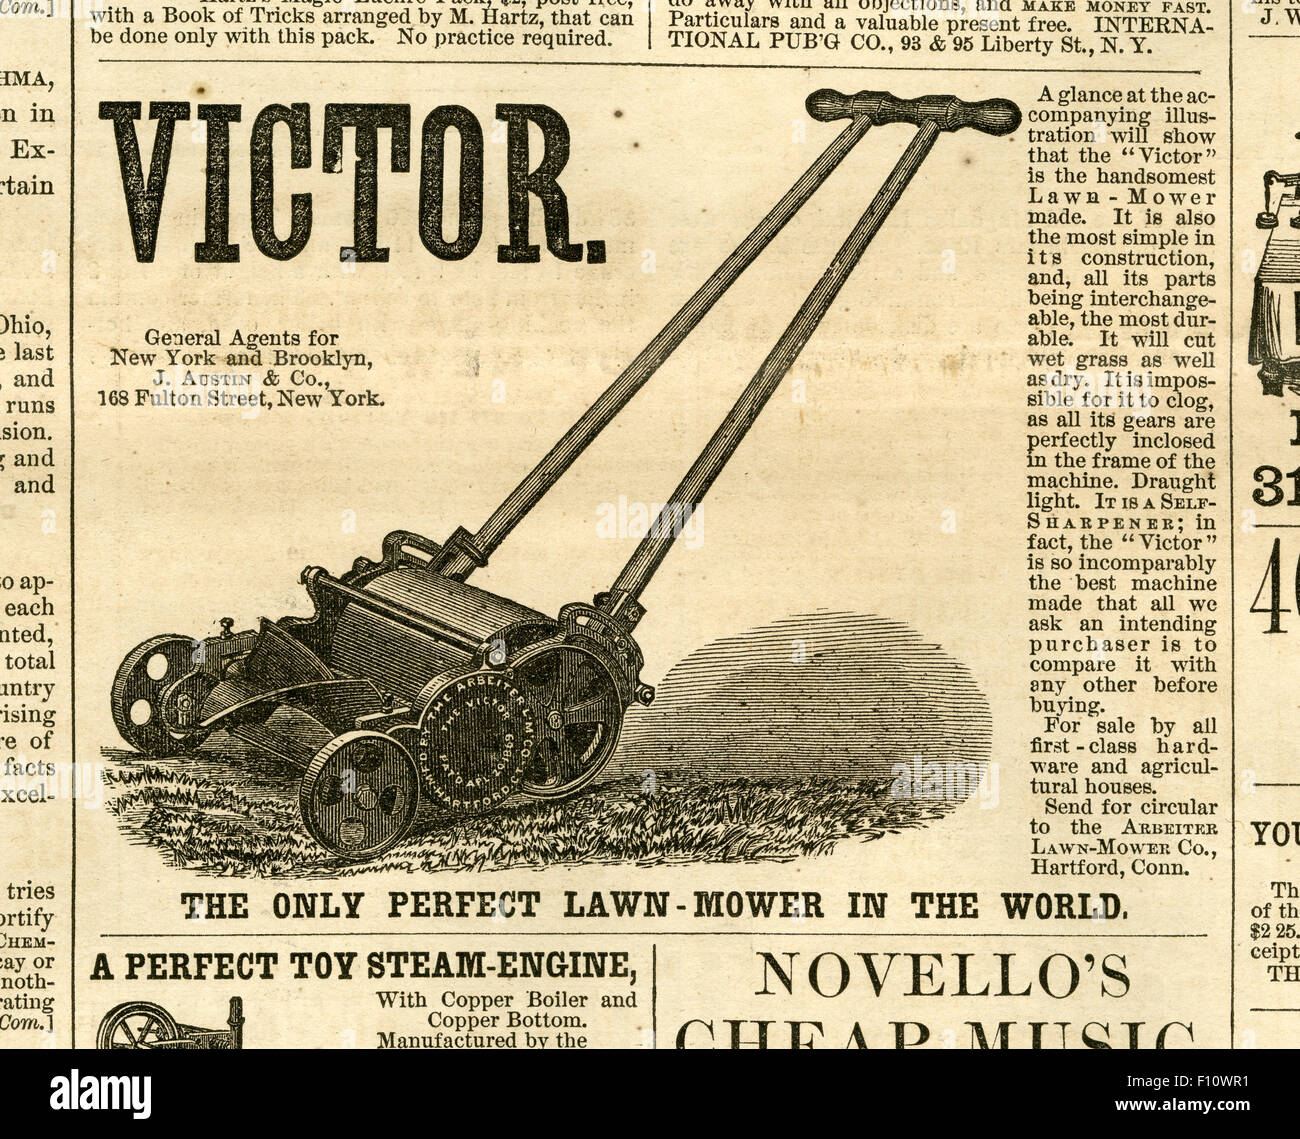 Antique 1872 engraving from Harper's Weekly, advertisement for The Victor lawn mowers by The Arbeiter Lawn Mower Company of Hartford, CT. Stock Photo